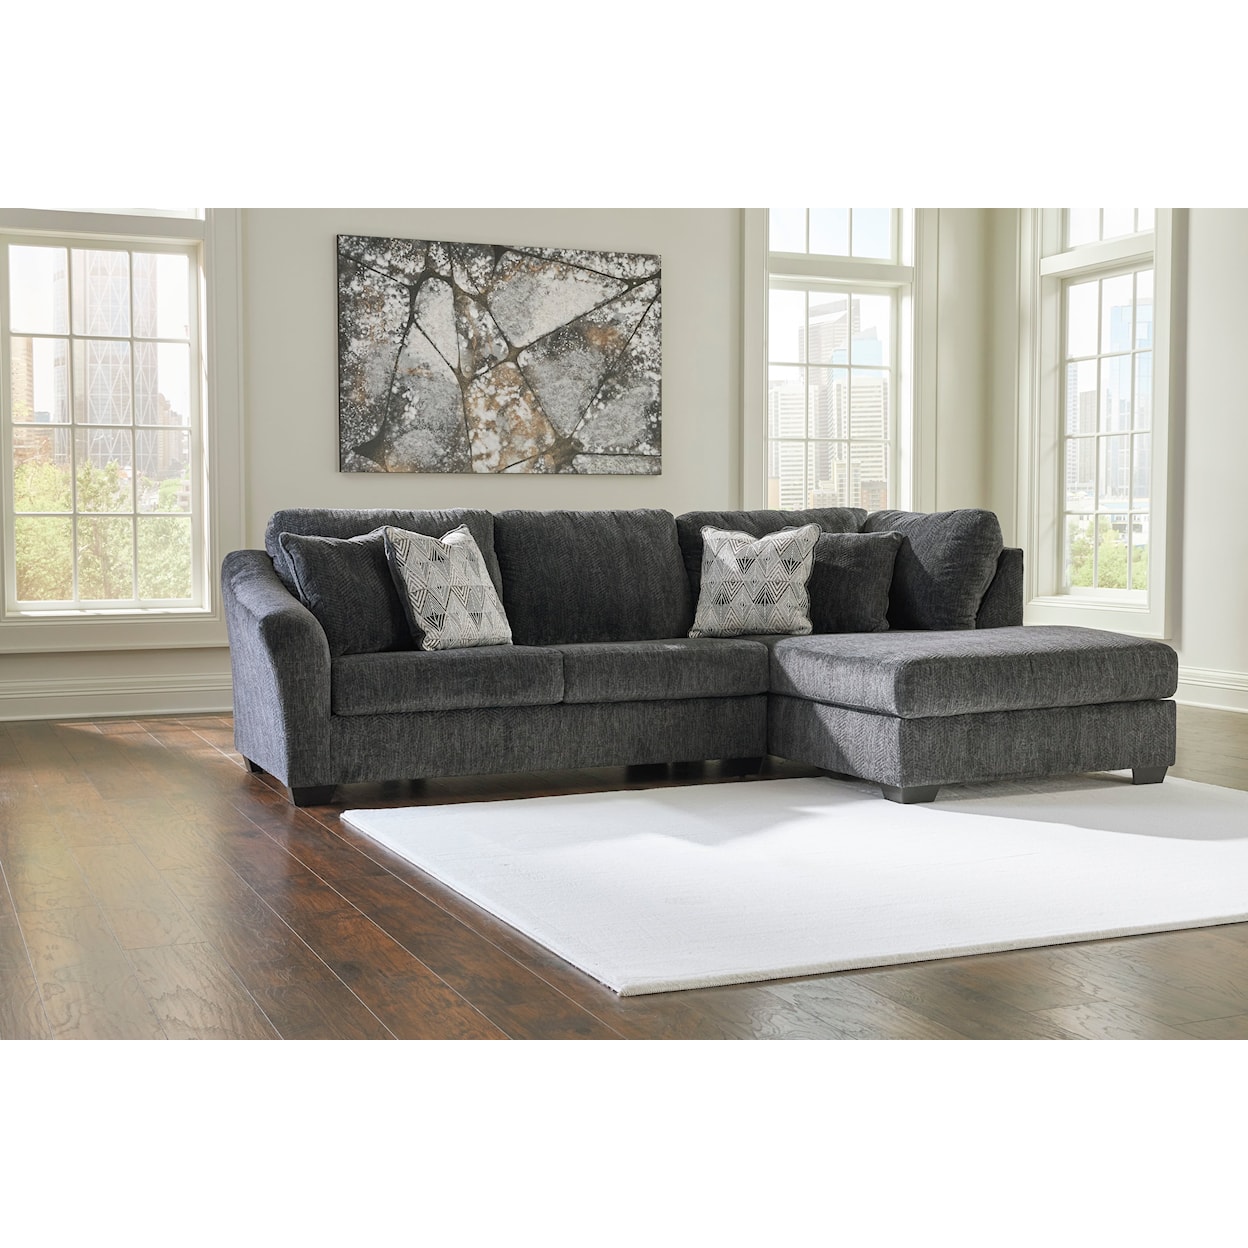 Ashley Furniture Signature Design Biddeford 2-Piece Sectional with Chaise